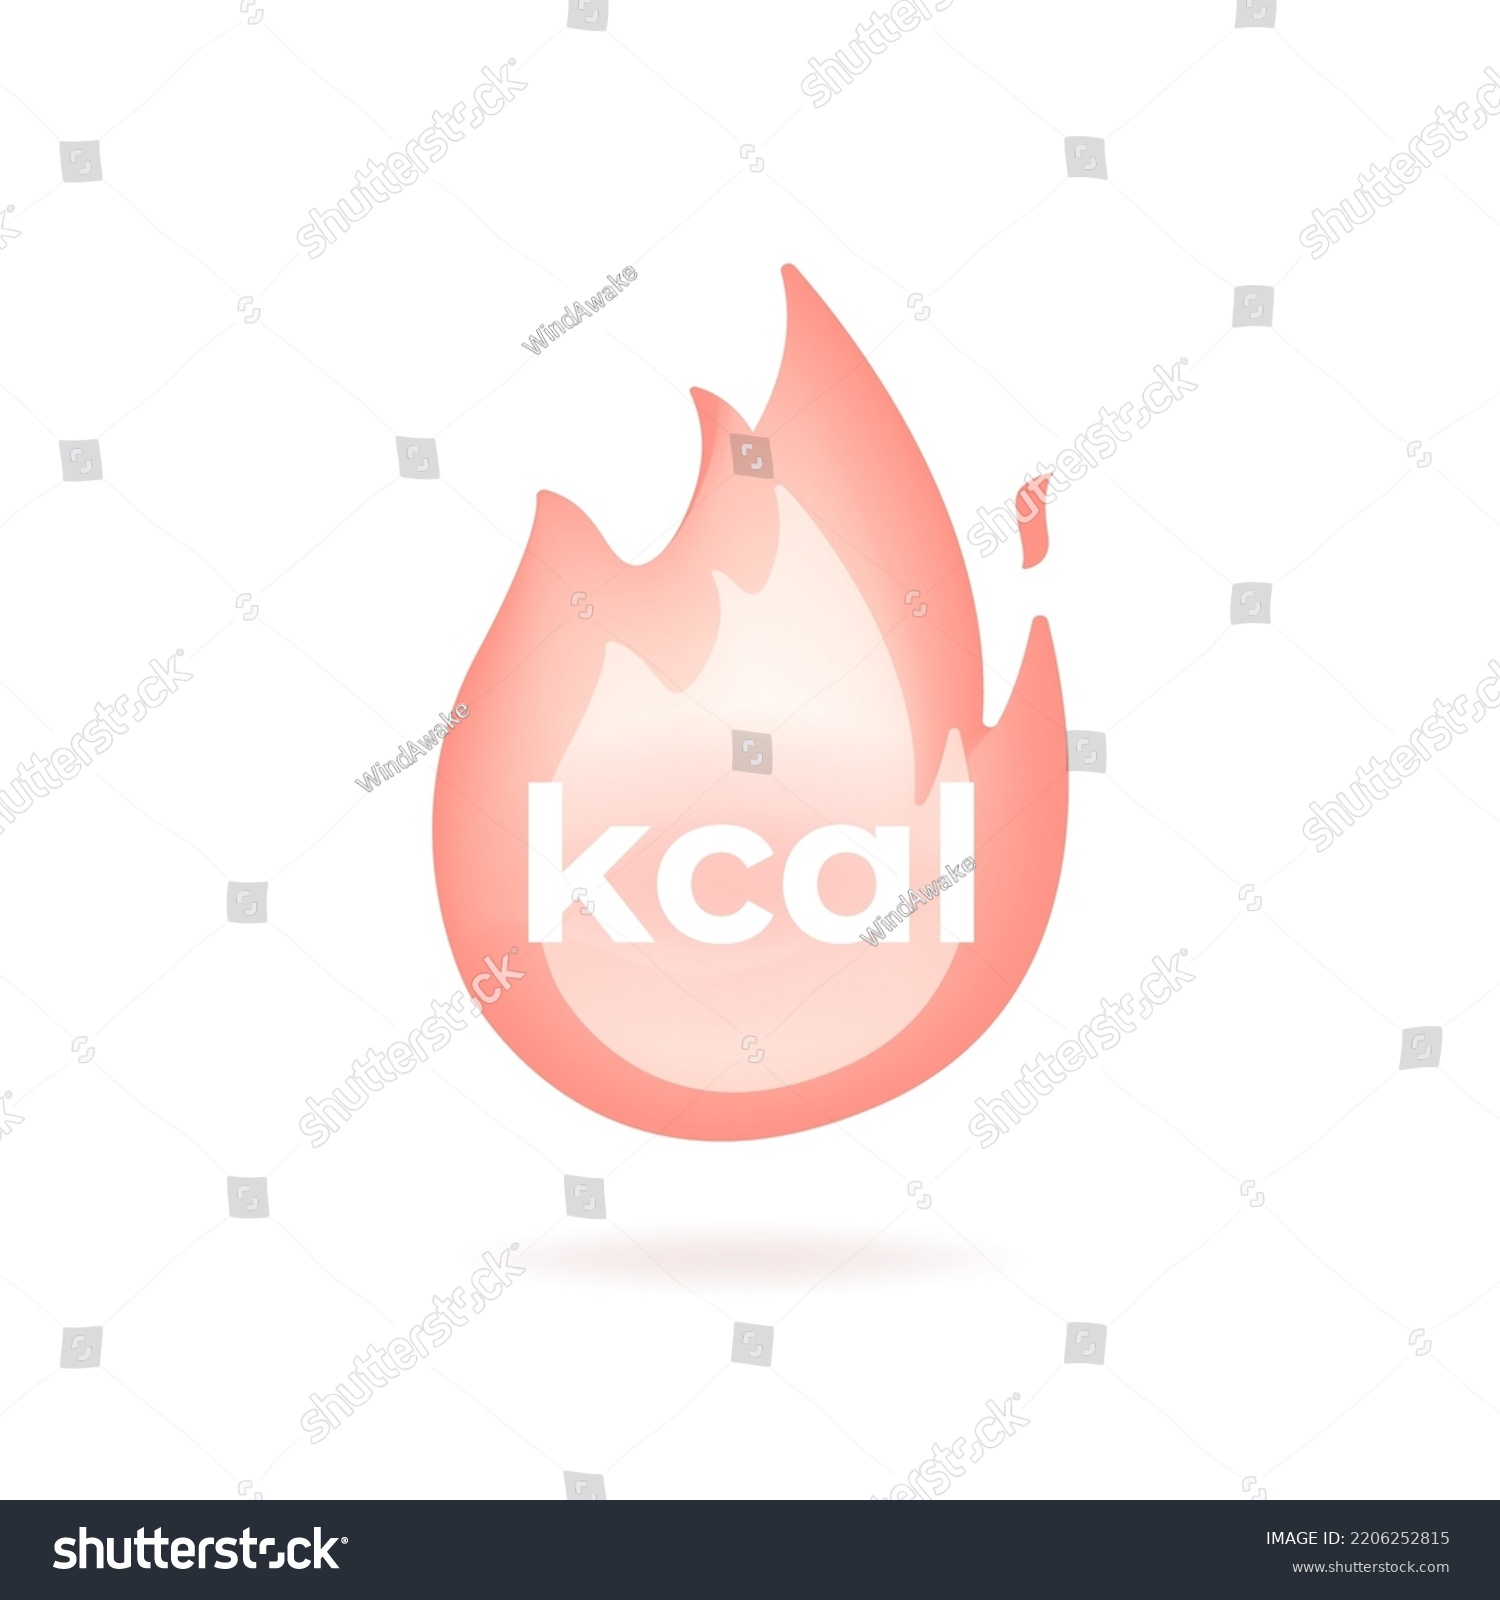 SVG of kcal icon, kilocalorie, fat burning 3d symbol vector. svg